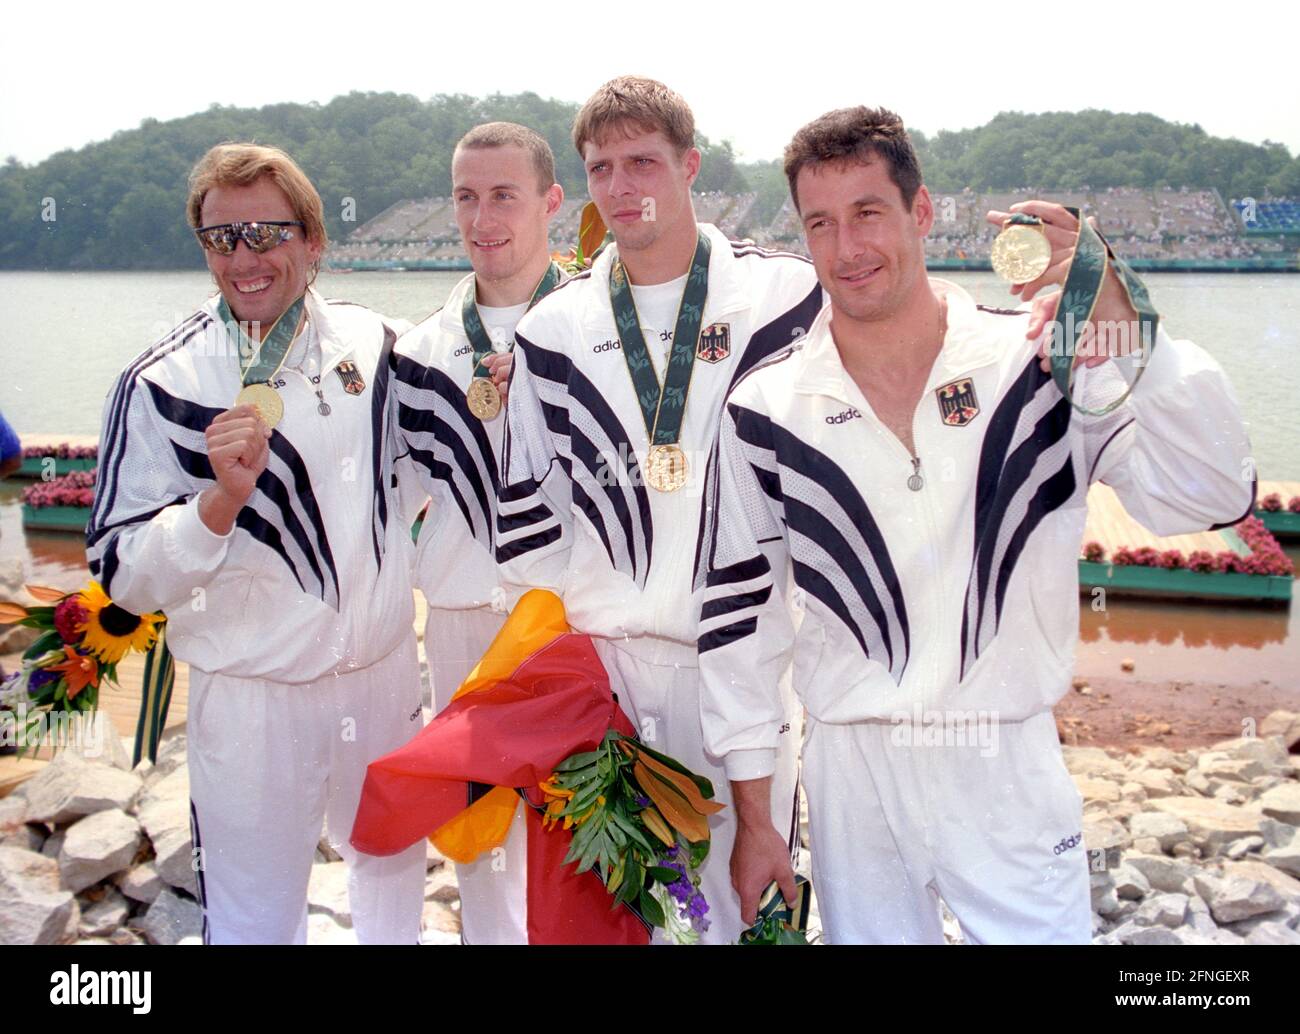 Olympic Games 1996 in Atlanta. Canoe Racing Award Ceremony Men's Four - Kayak over 1000m from left: Detlef Hofmann, Olaf Winter ,Mark Zabel and Thomas Reineck with Gold Medals 03.08.1996 [automated translation] Stock Photo